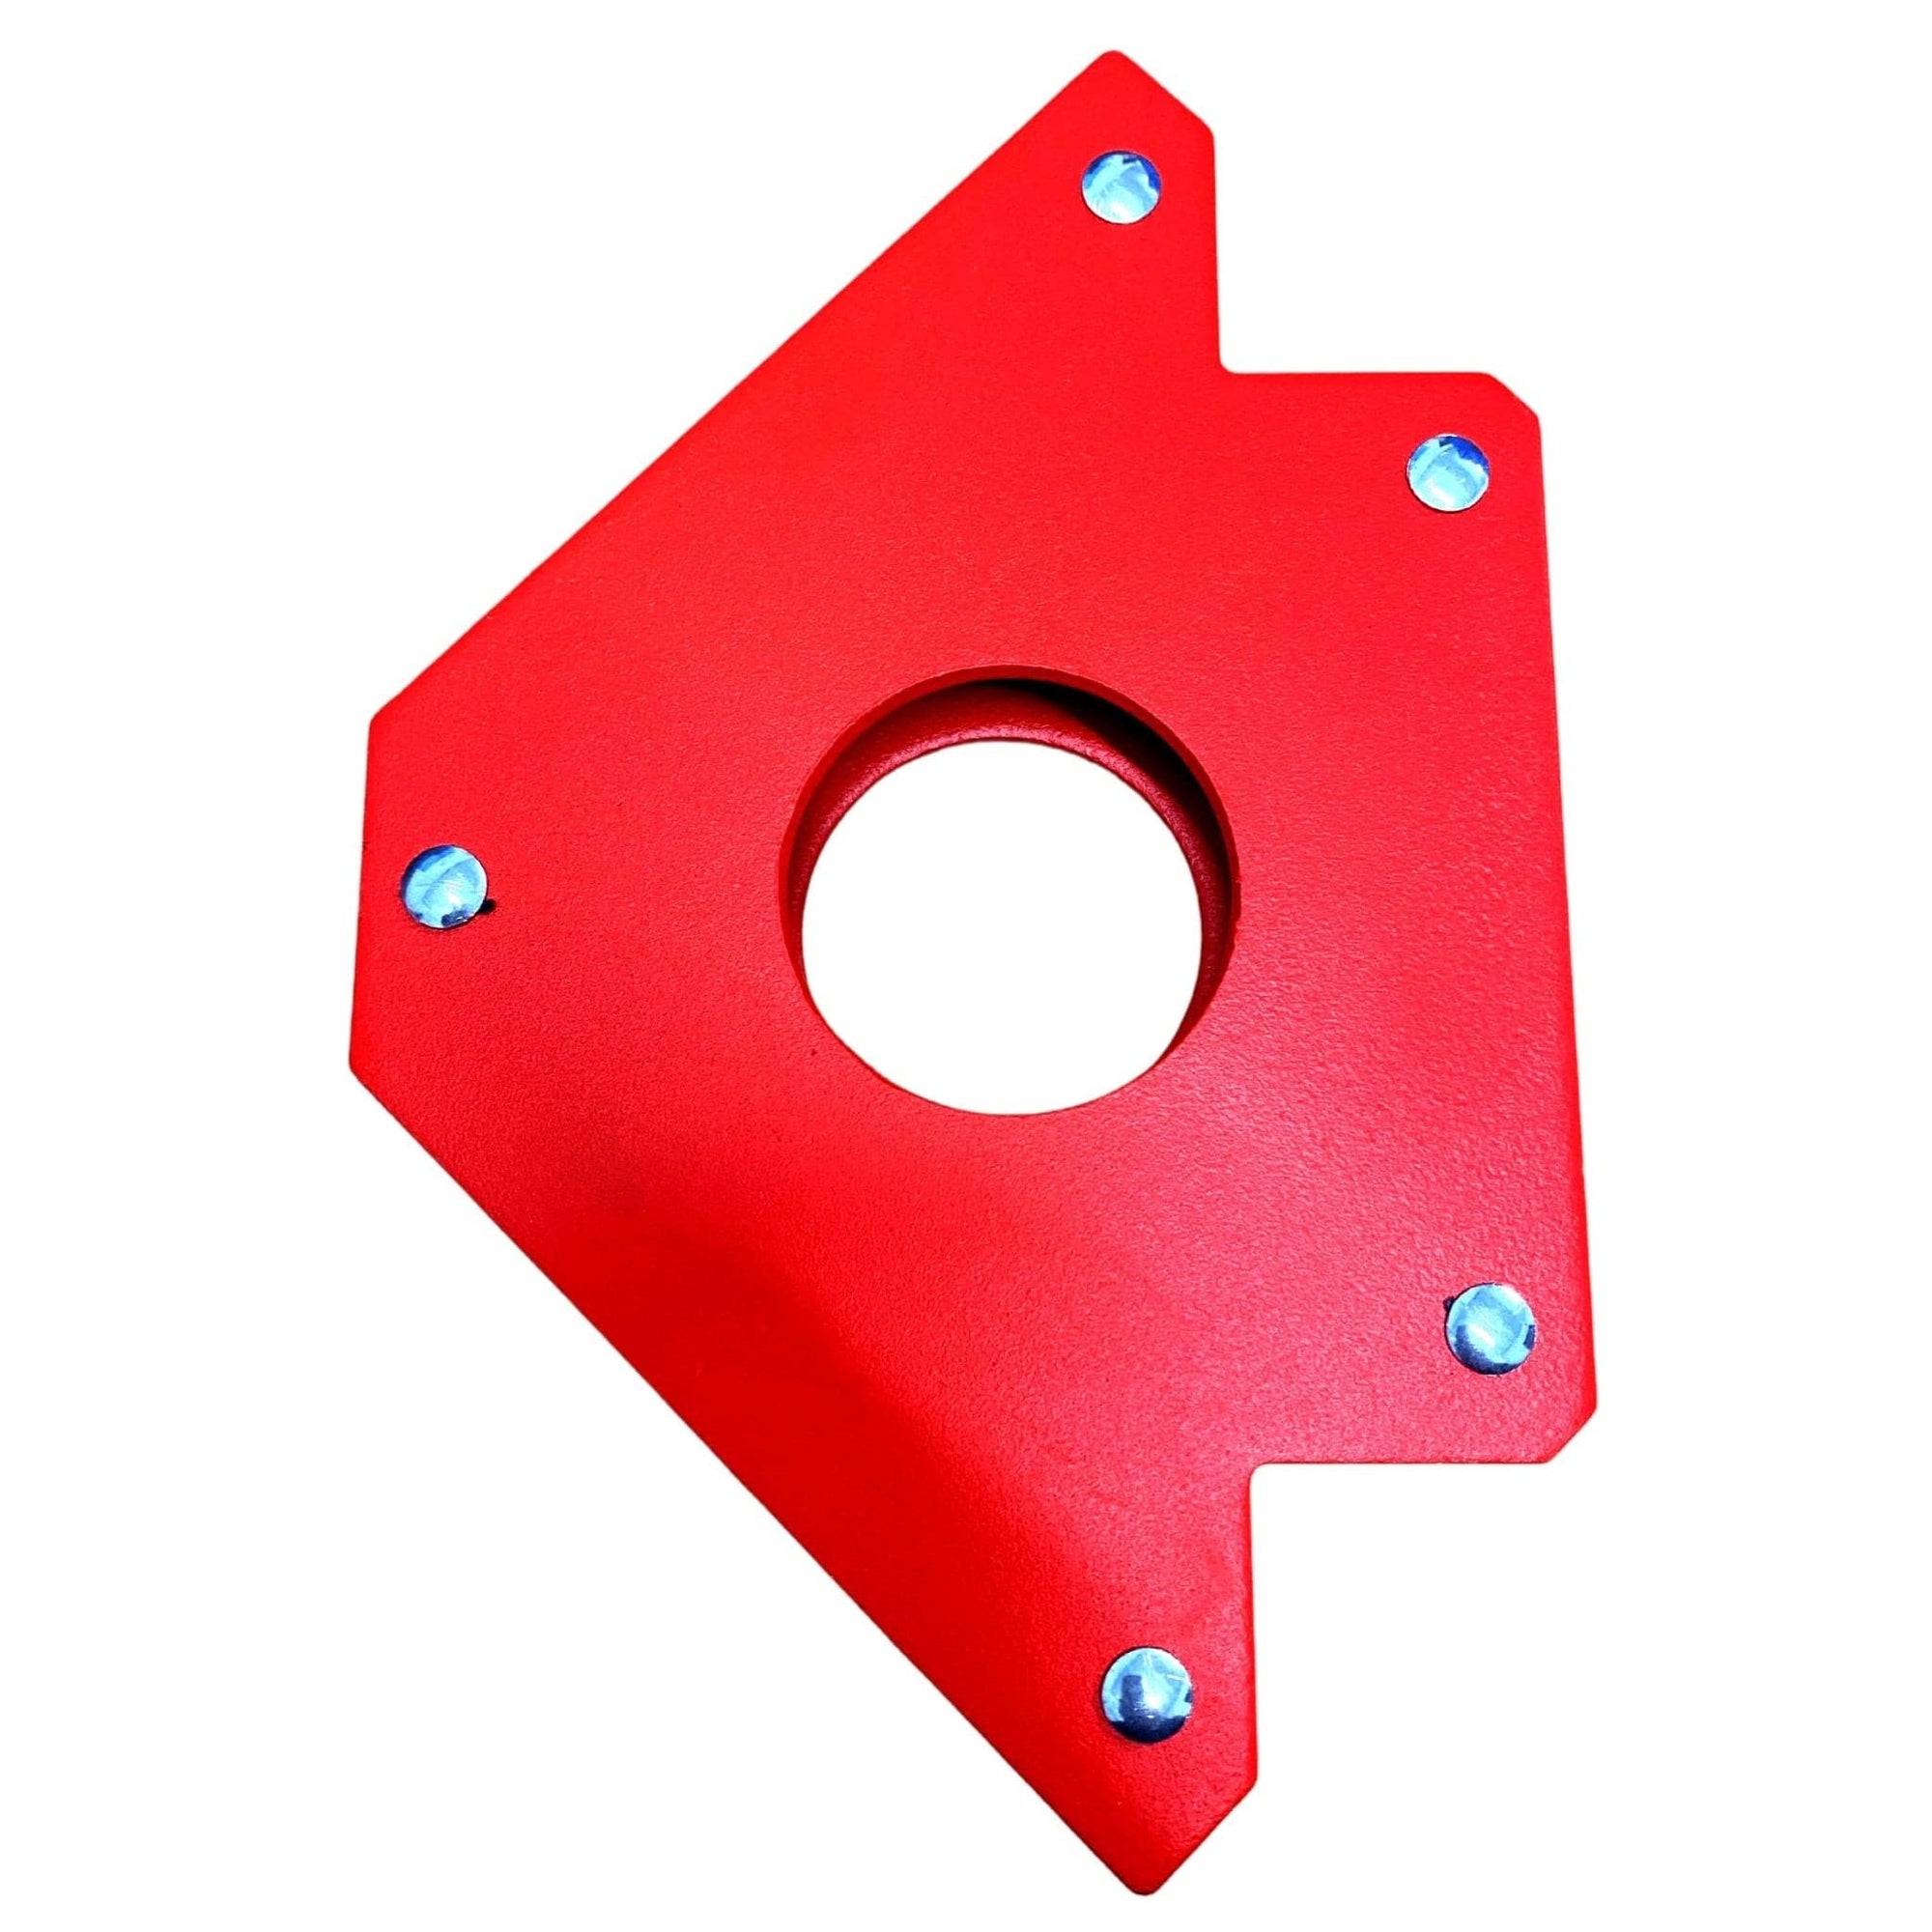 5” magnetic welding square - South East Clearance Centre